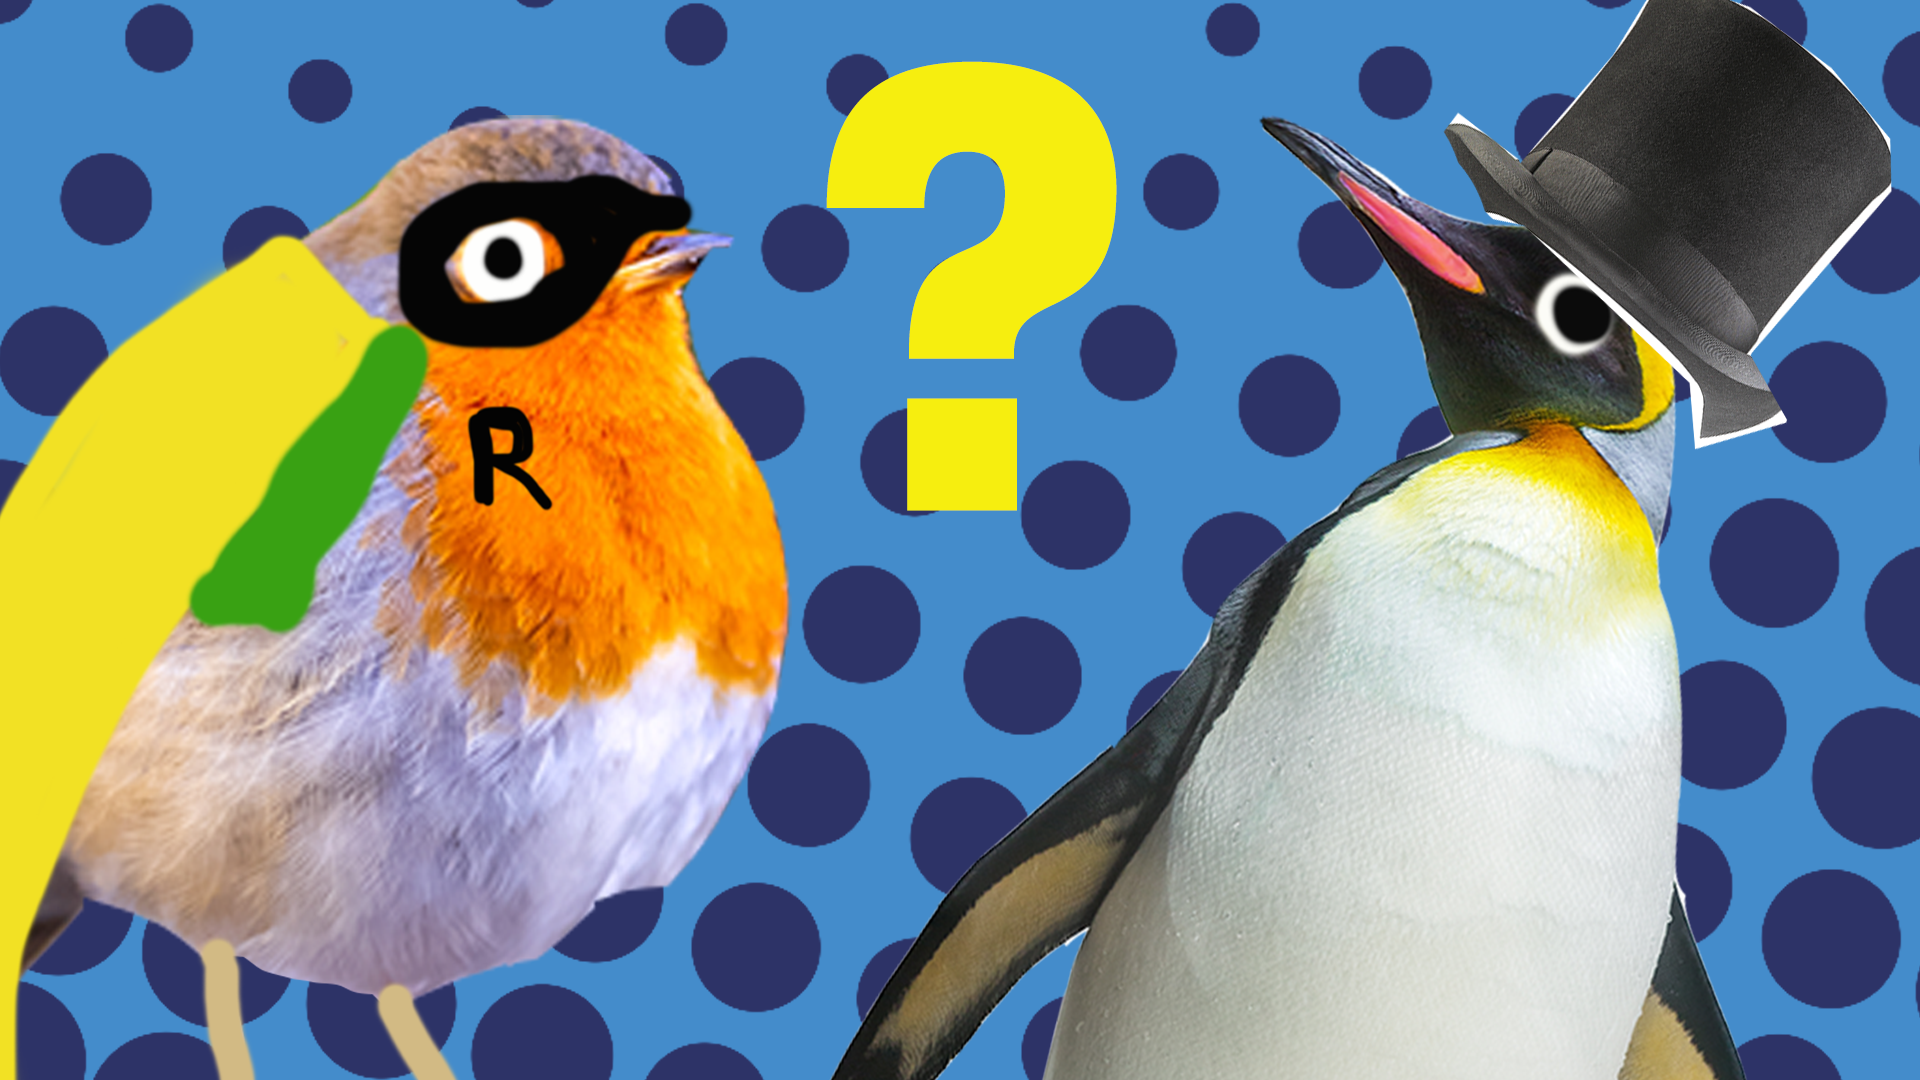 Penguin and robin with question mark and blue background